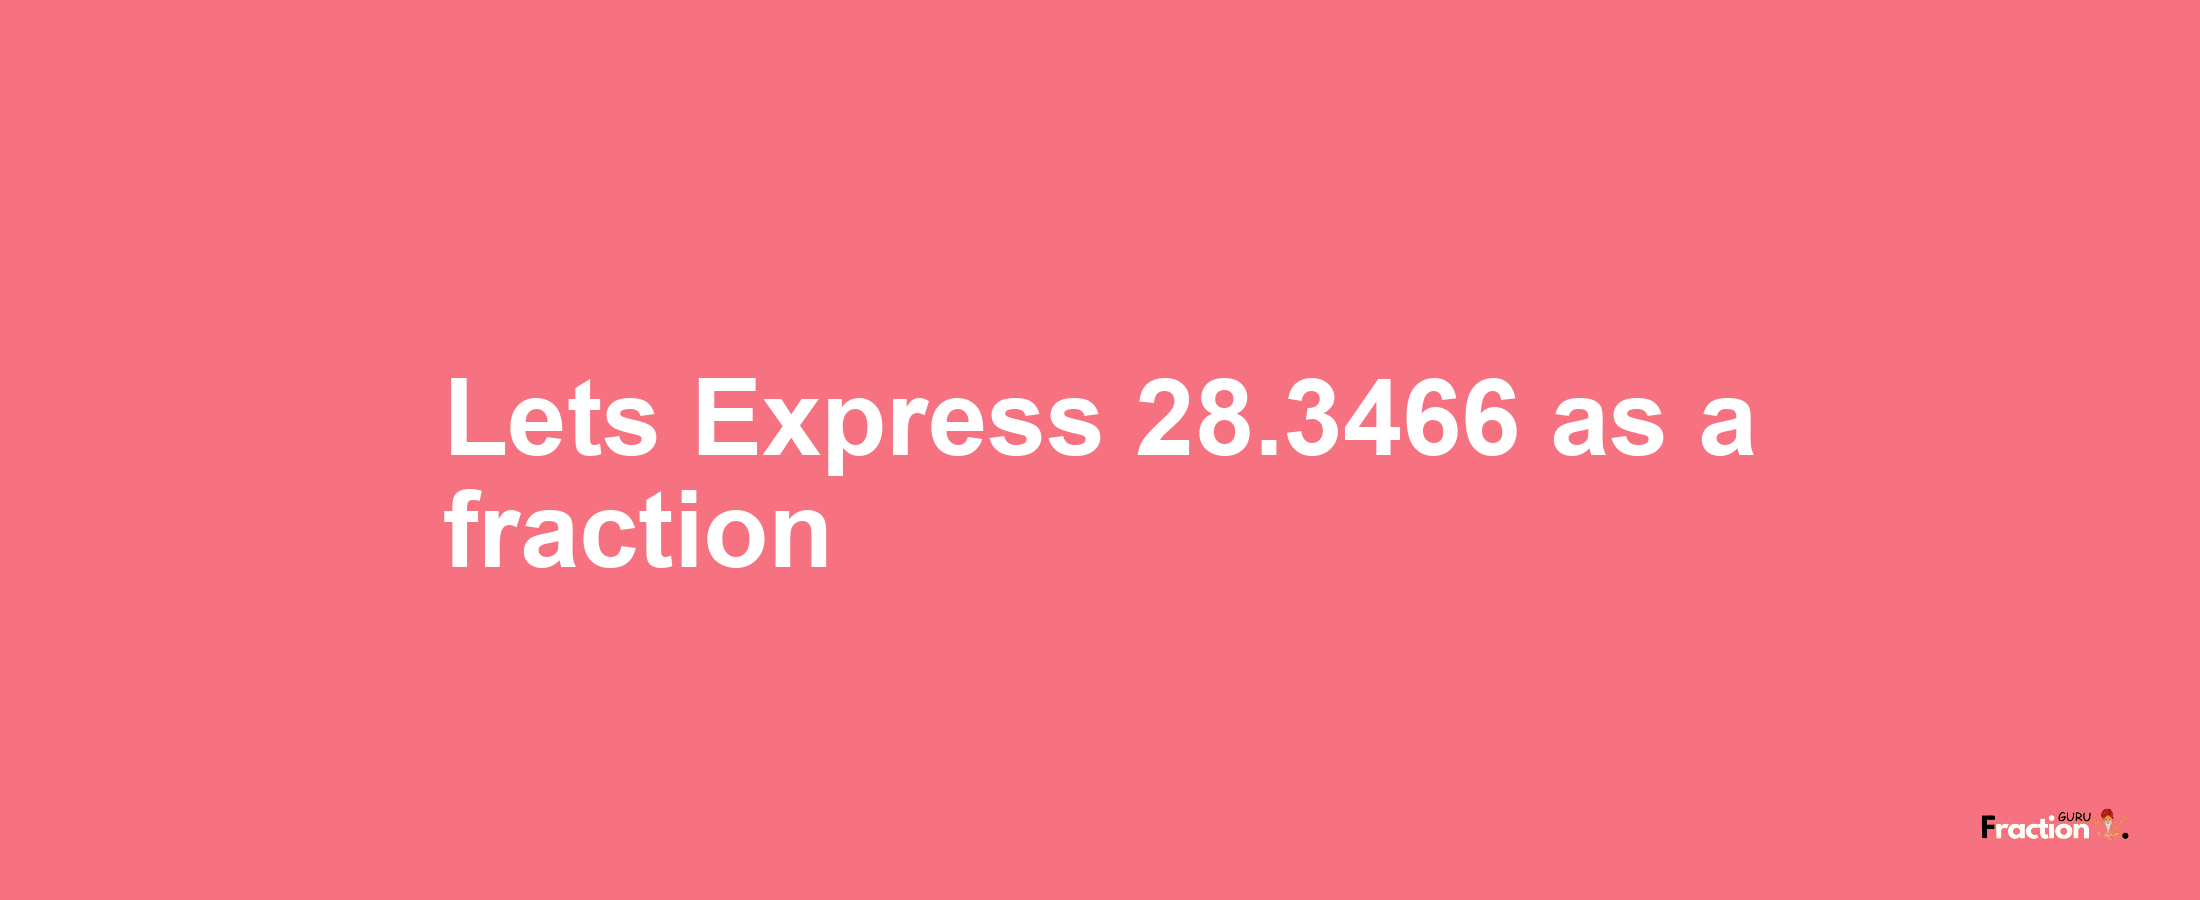 Lets Express 28.3466 as afraction